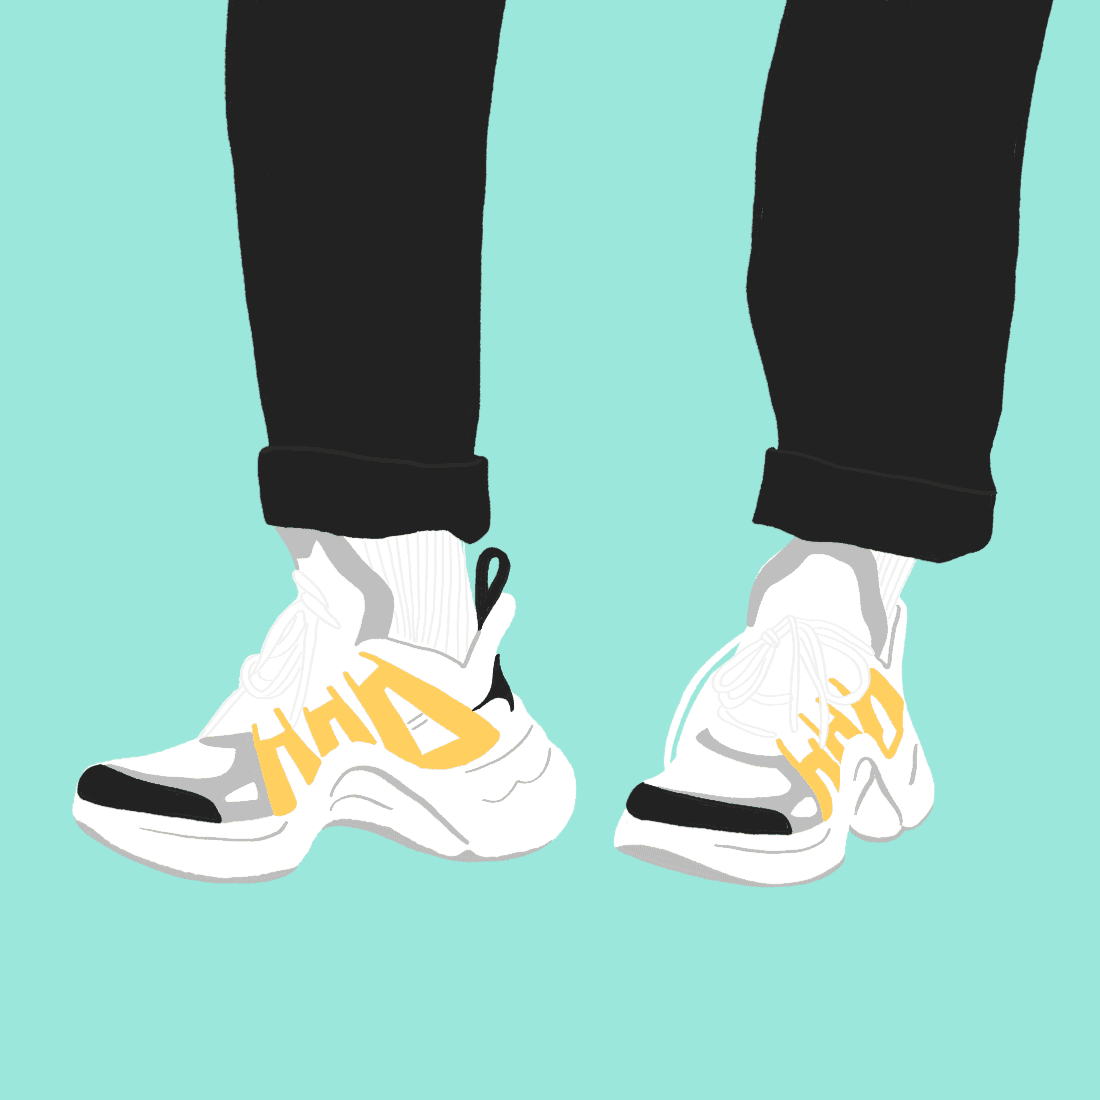 An Illustrated Guide to Iconic ’90s Shoe Trends